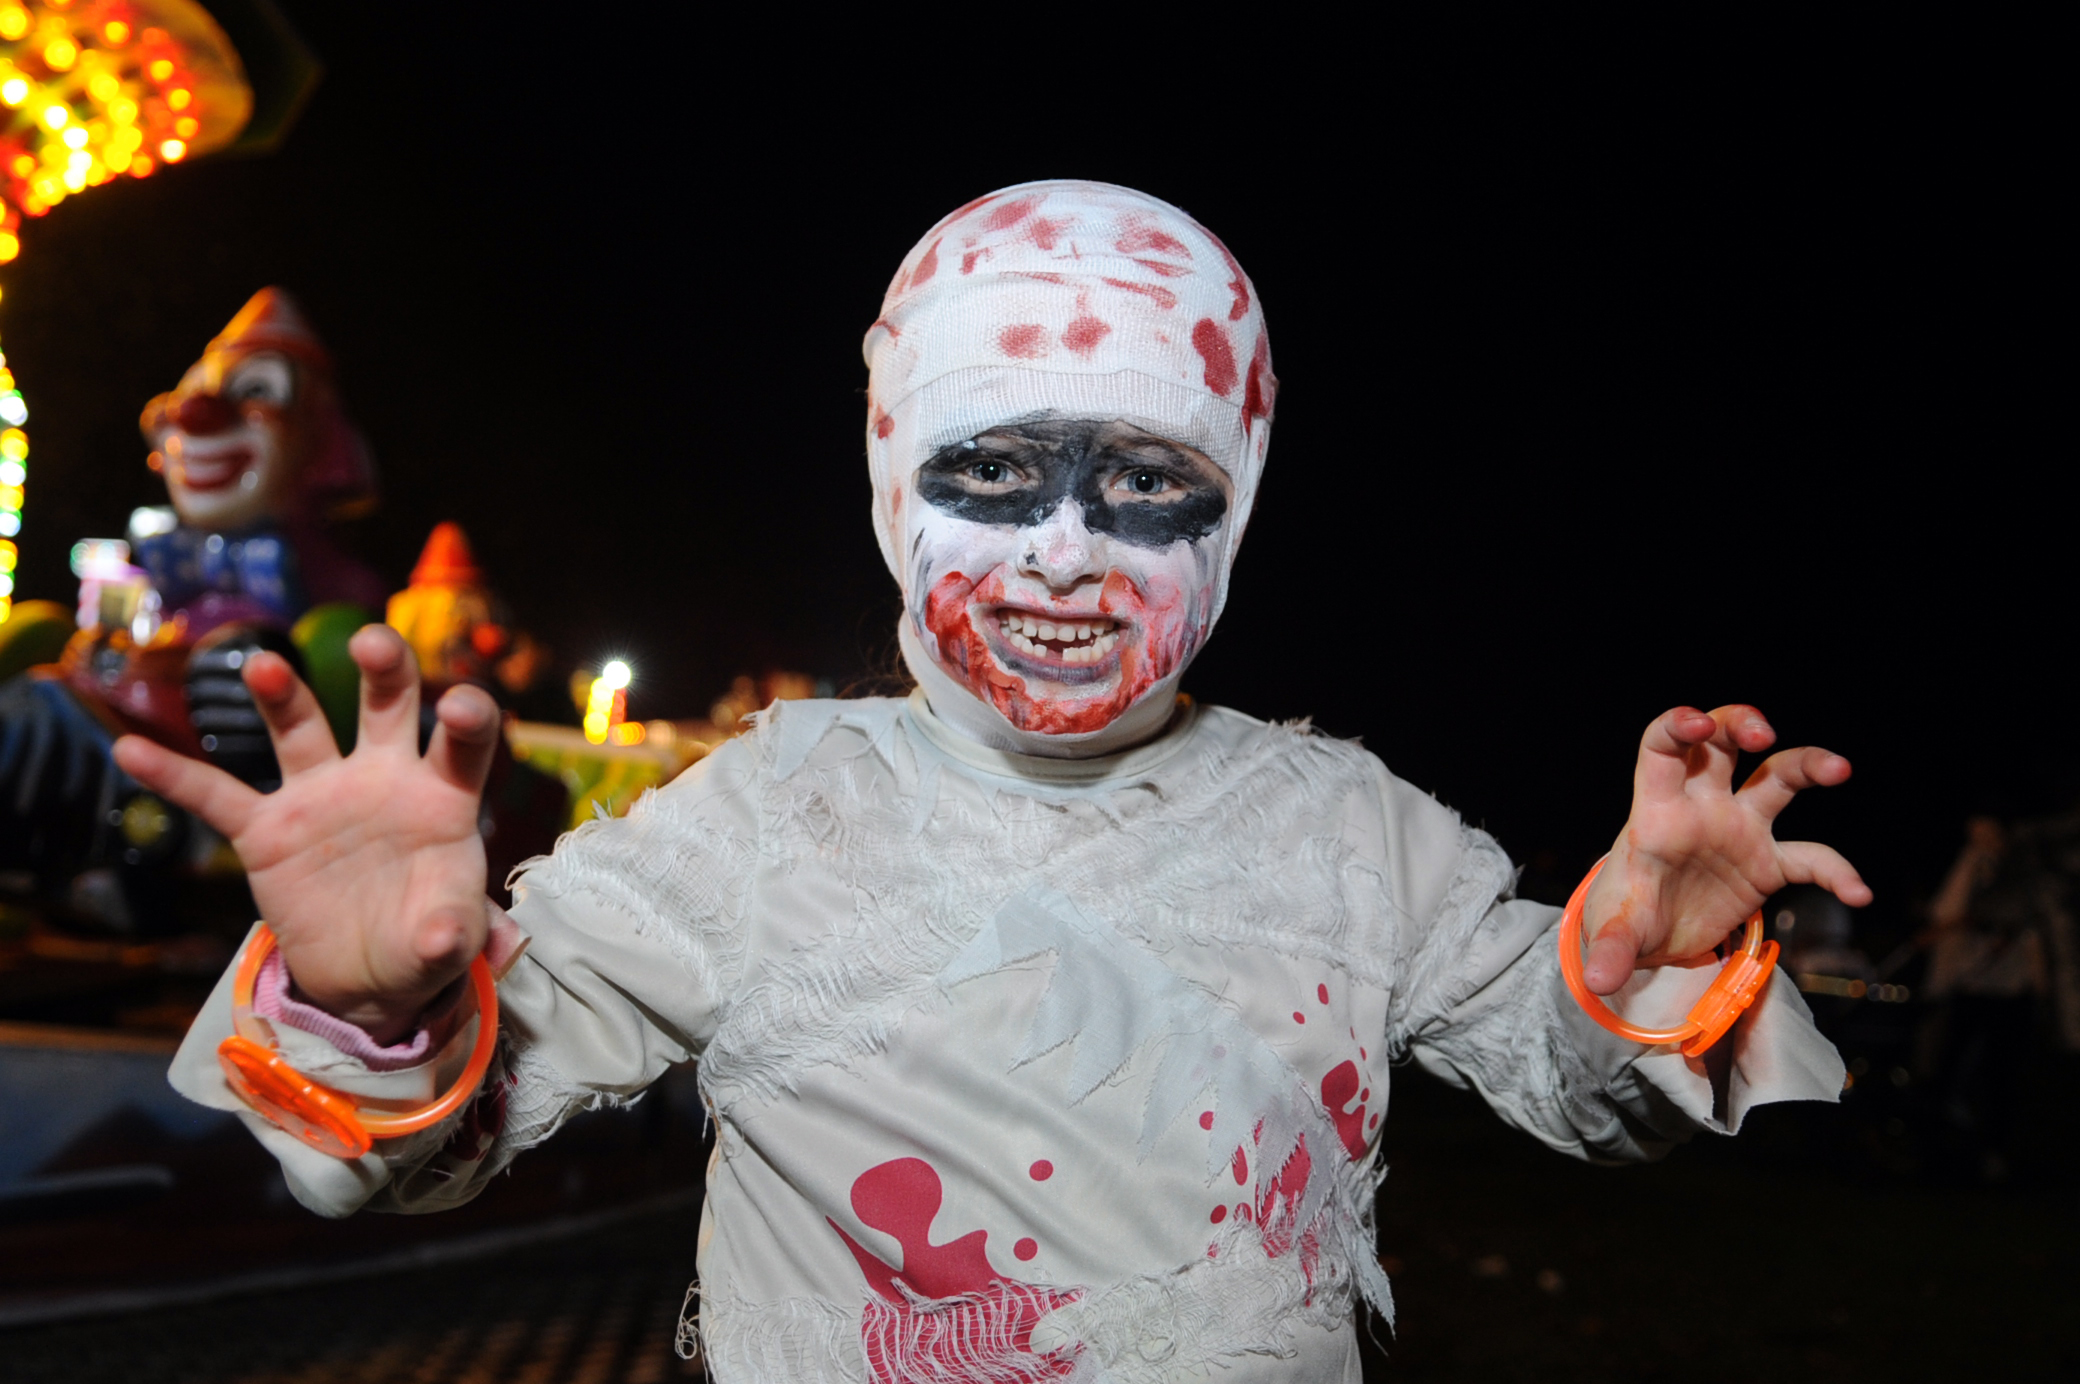 PICTURES: Halloween fireworks at Kearsley Cricket Club - The Bolton News